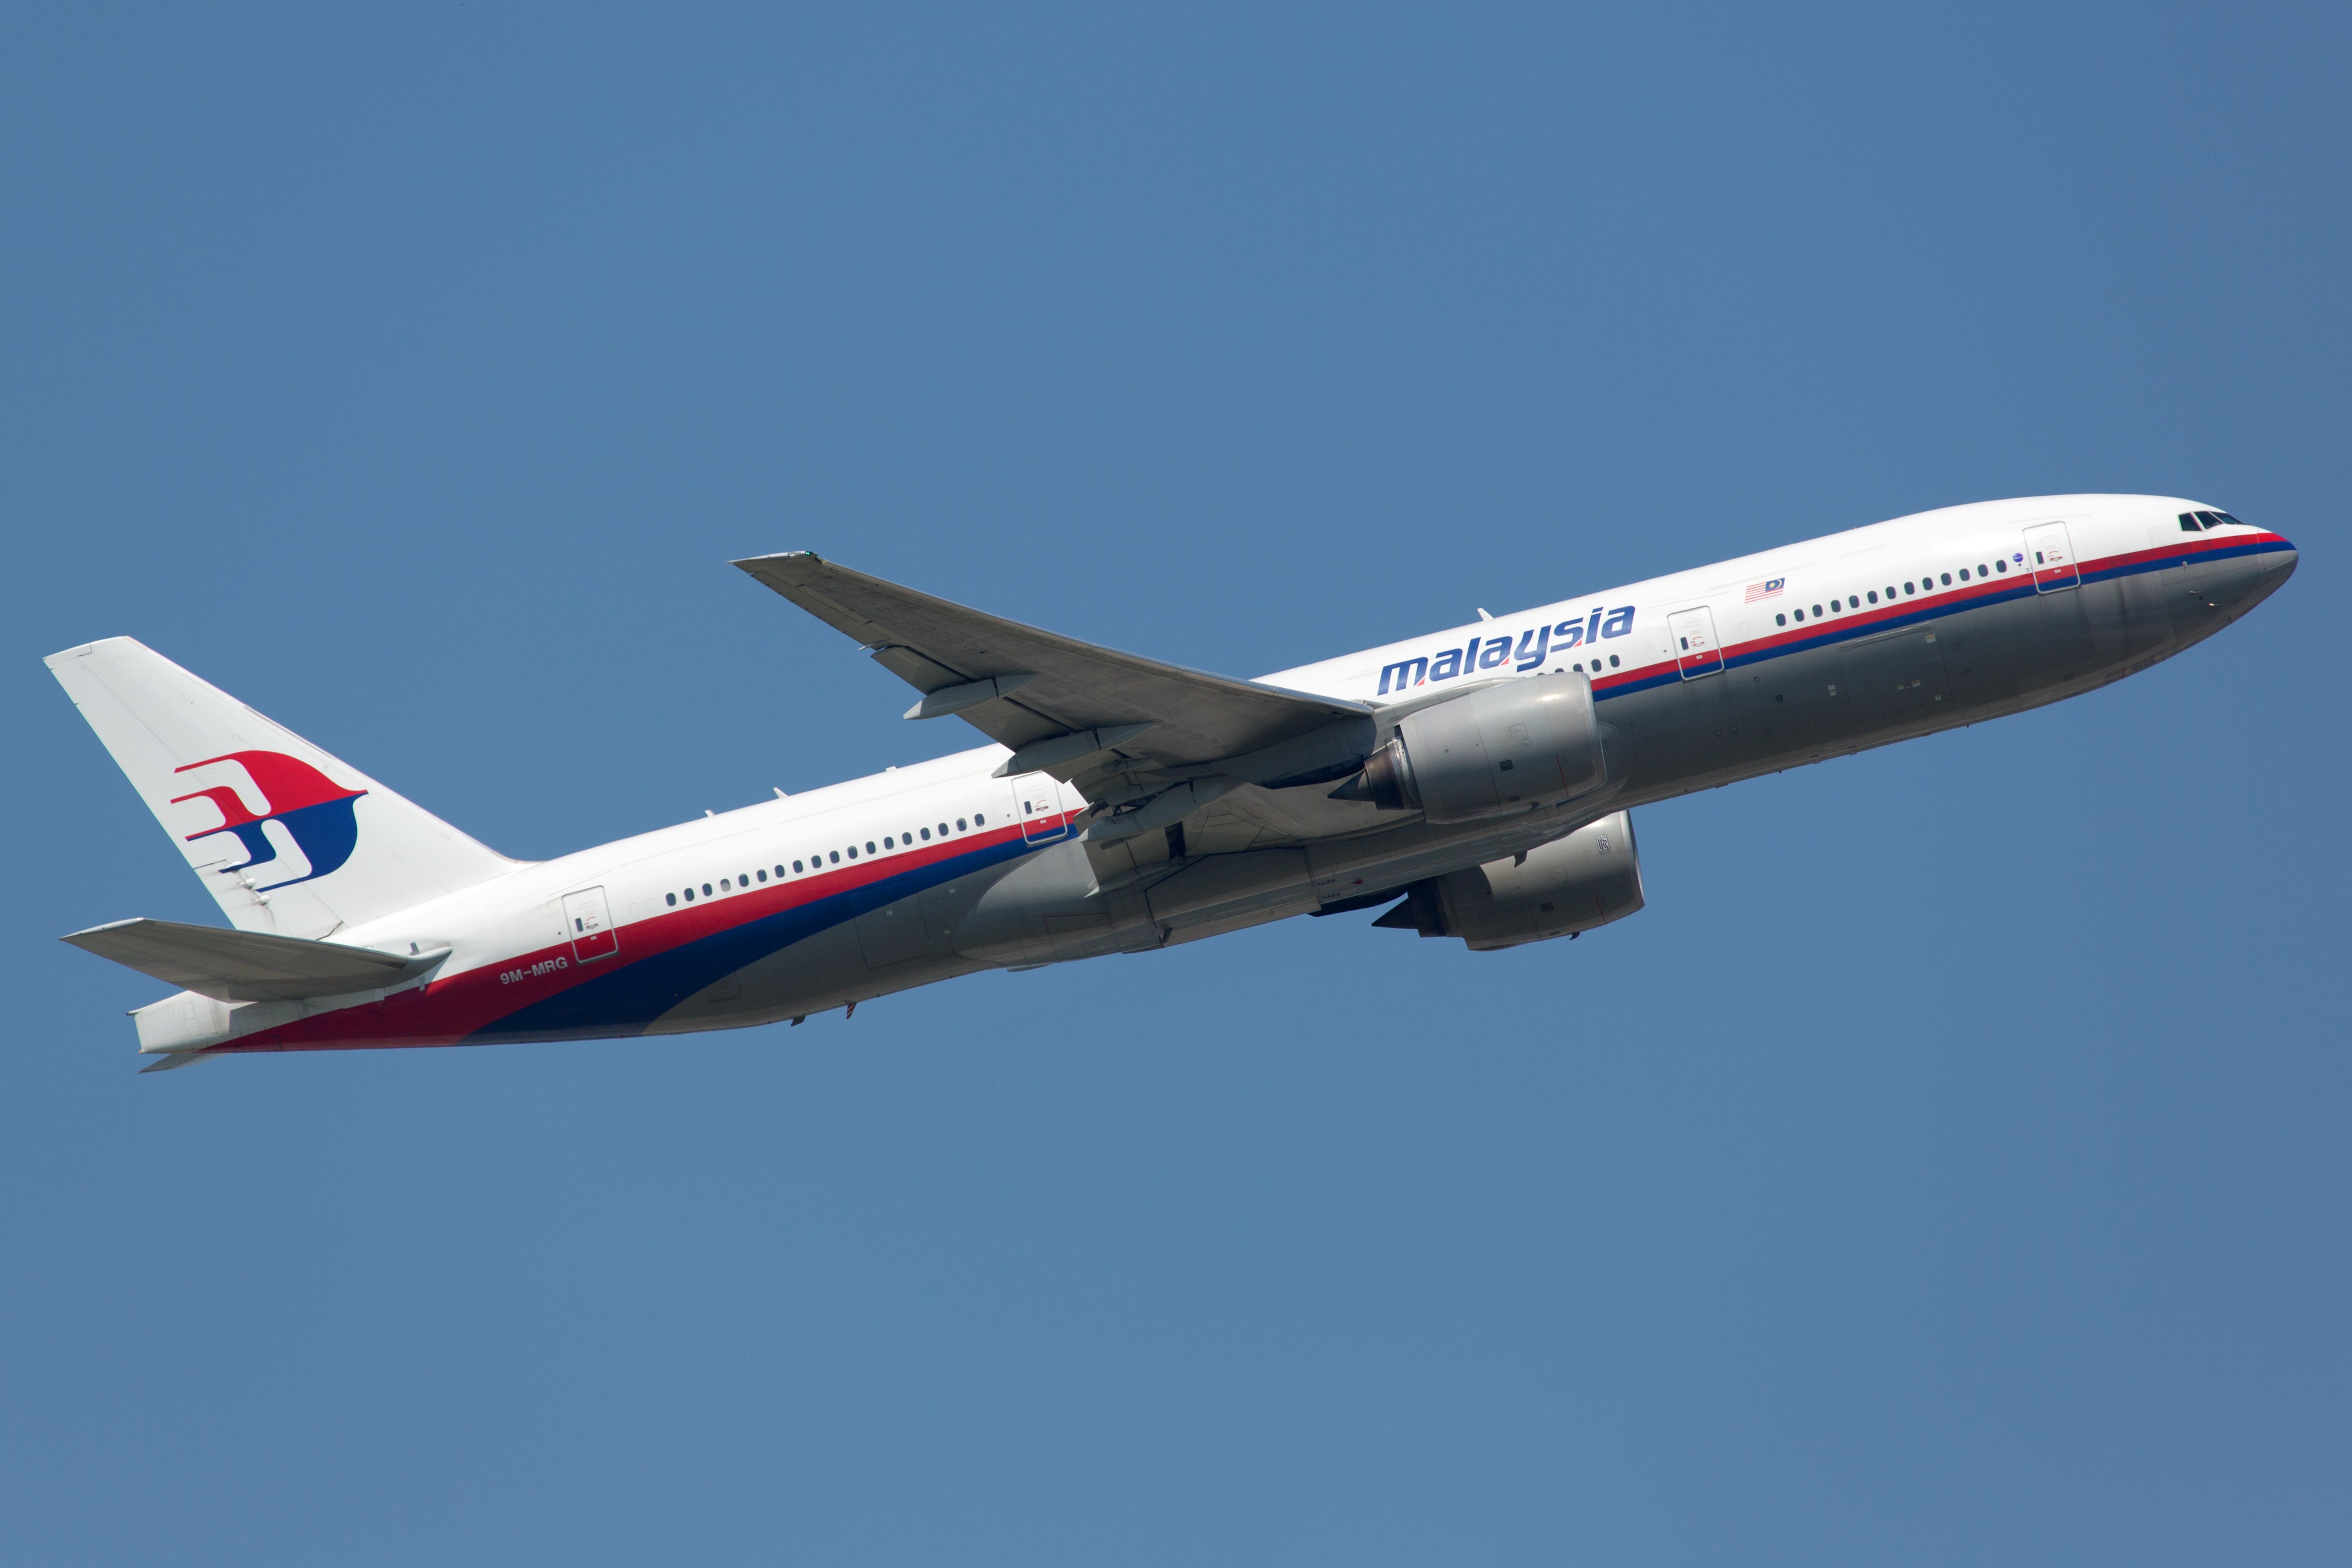 A Malaysia Airlines Boeing 777 takes off on June 19, 2013 in Frankfurt, Germany. The aircraft is the sister airplane of the crashed planes with the registration 9M-MRO and 9M-MRD